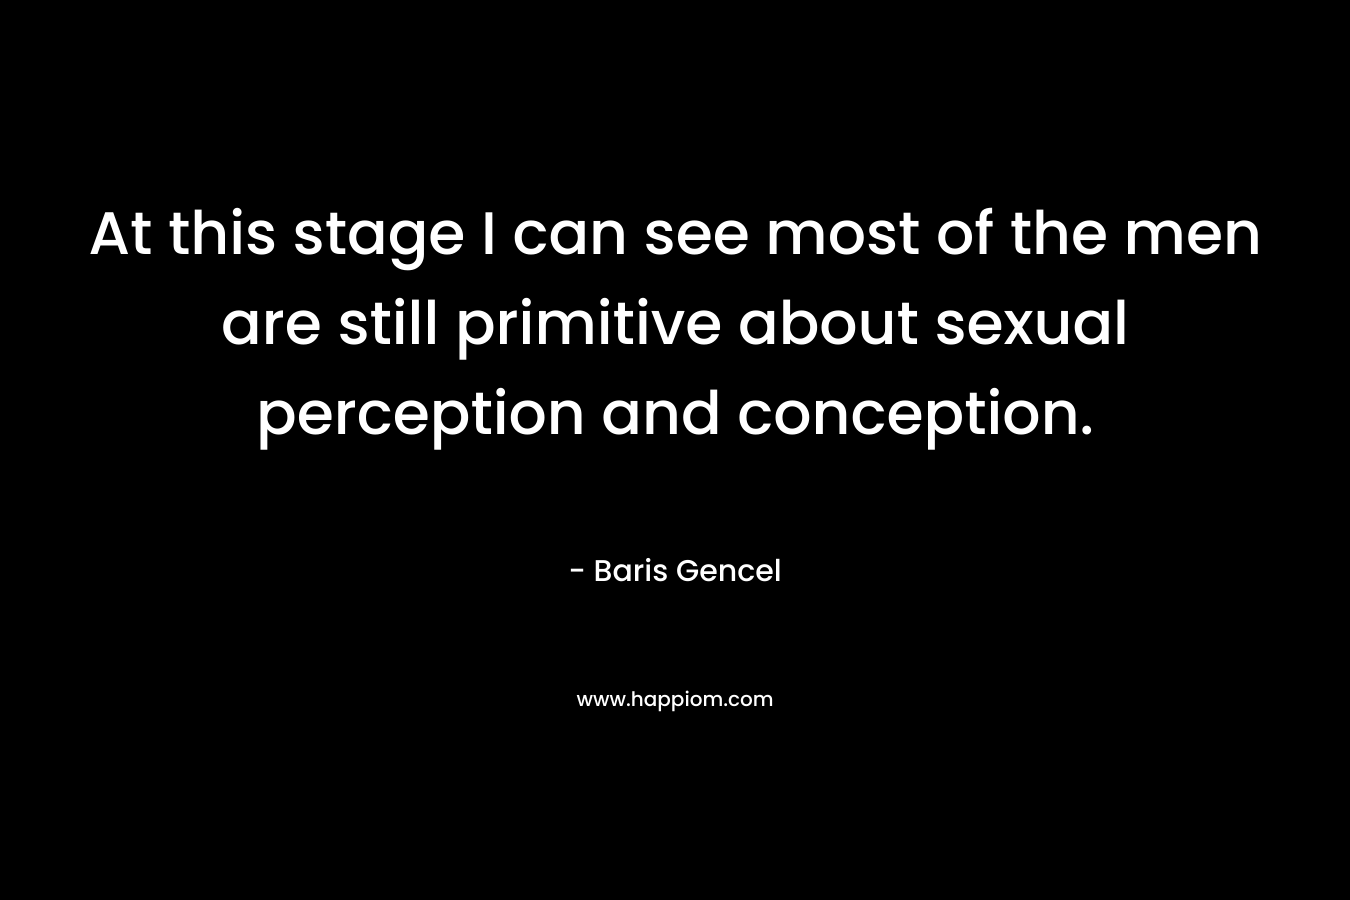 At this stage I can see most of the men are still primitive about sexual perception and conception.